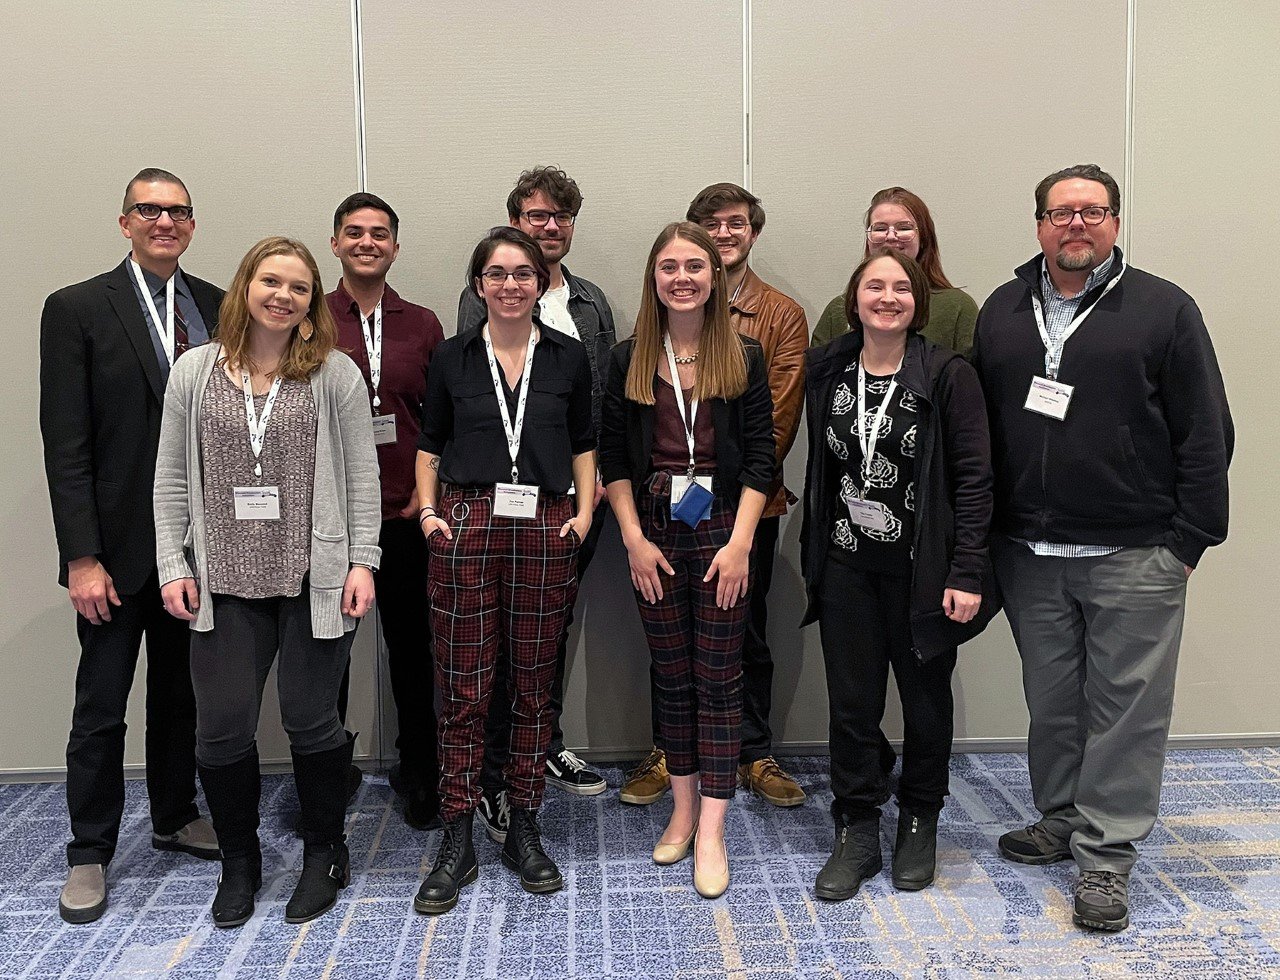 UW-River Falls journalism students attended the Wisconsin Broadcasters Association Student Seminar in Middleton on Feb. 25 where they won five statewide awards.